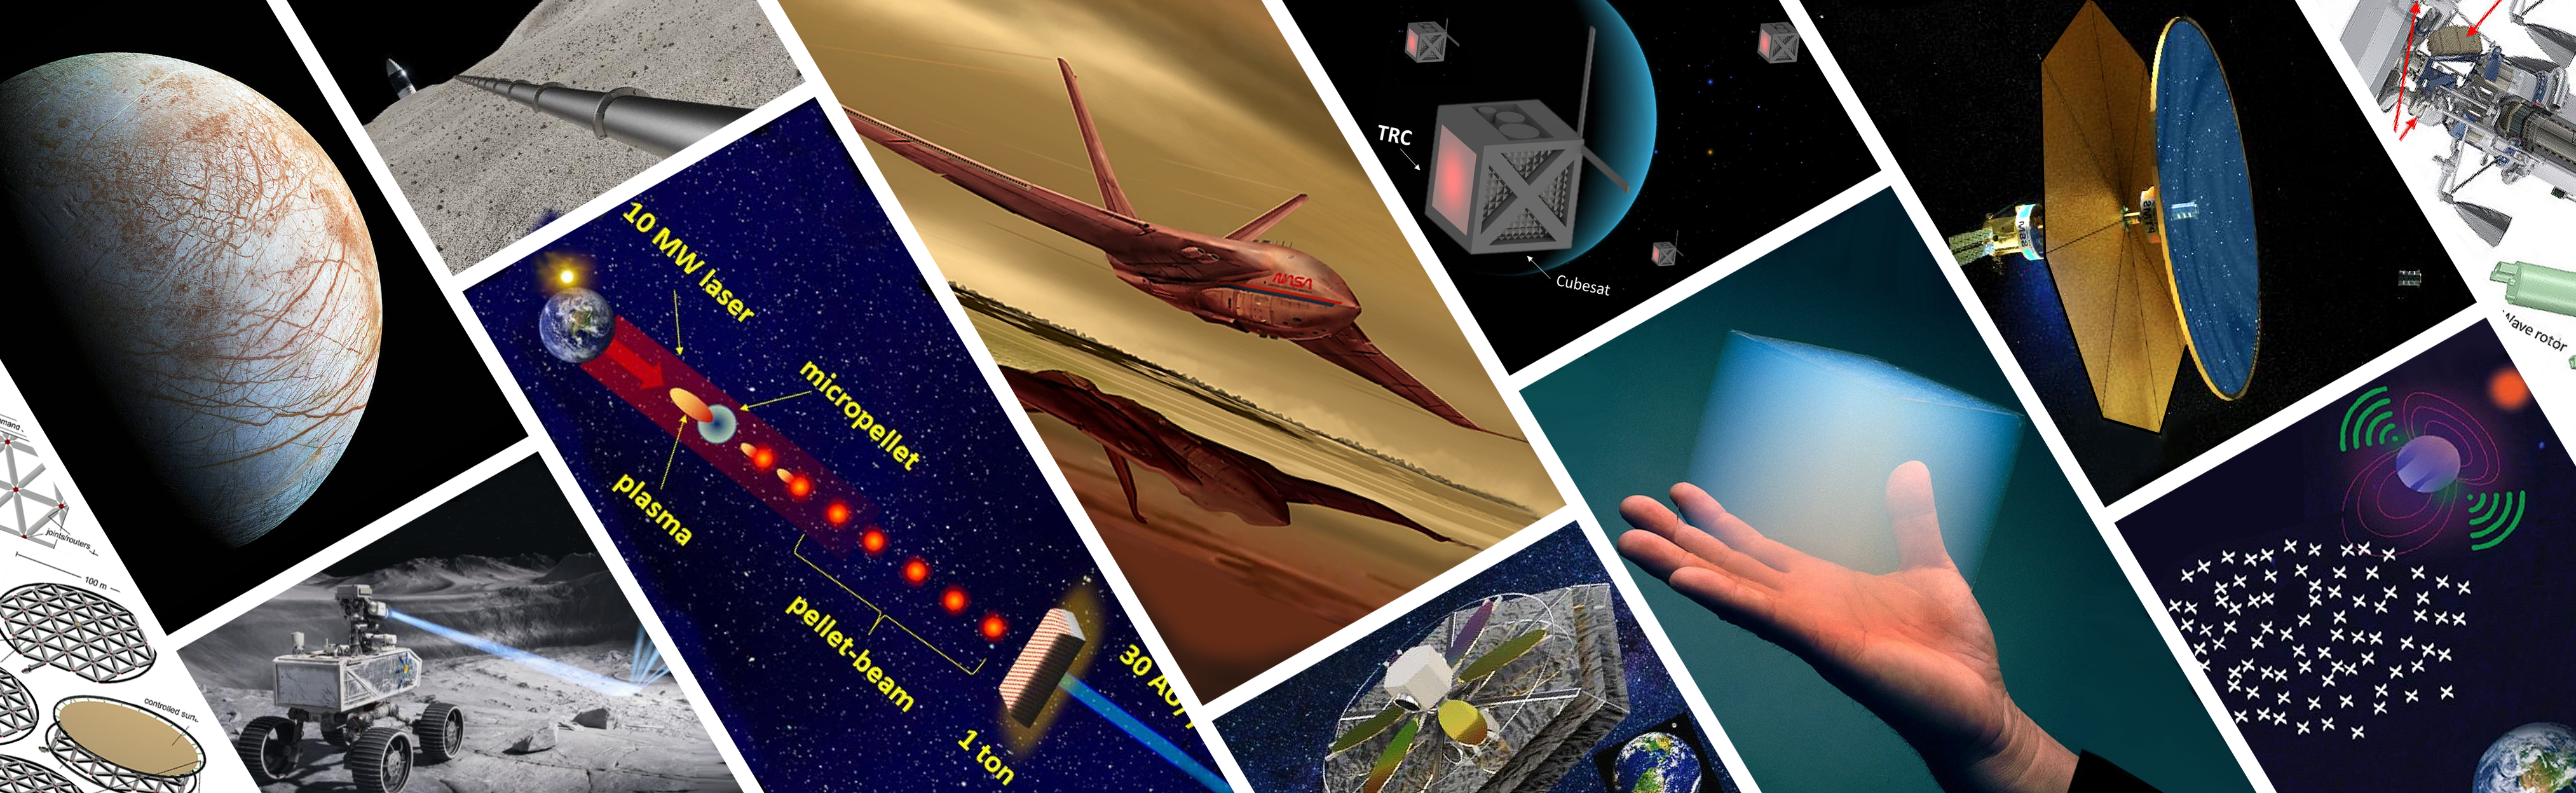 A mosaic of images showing futuristic technologies in space and on the Moon and other worlds.